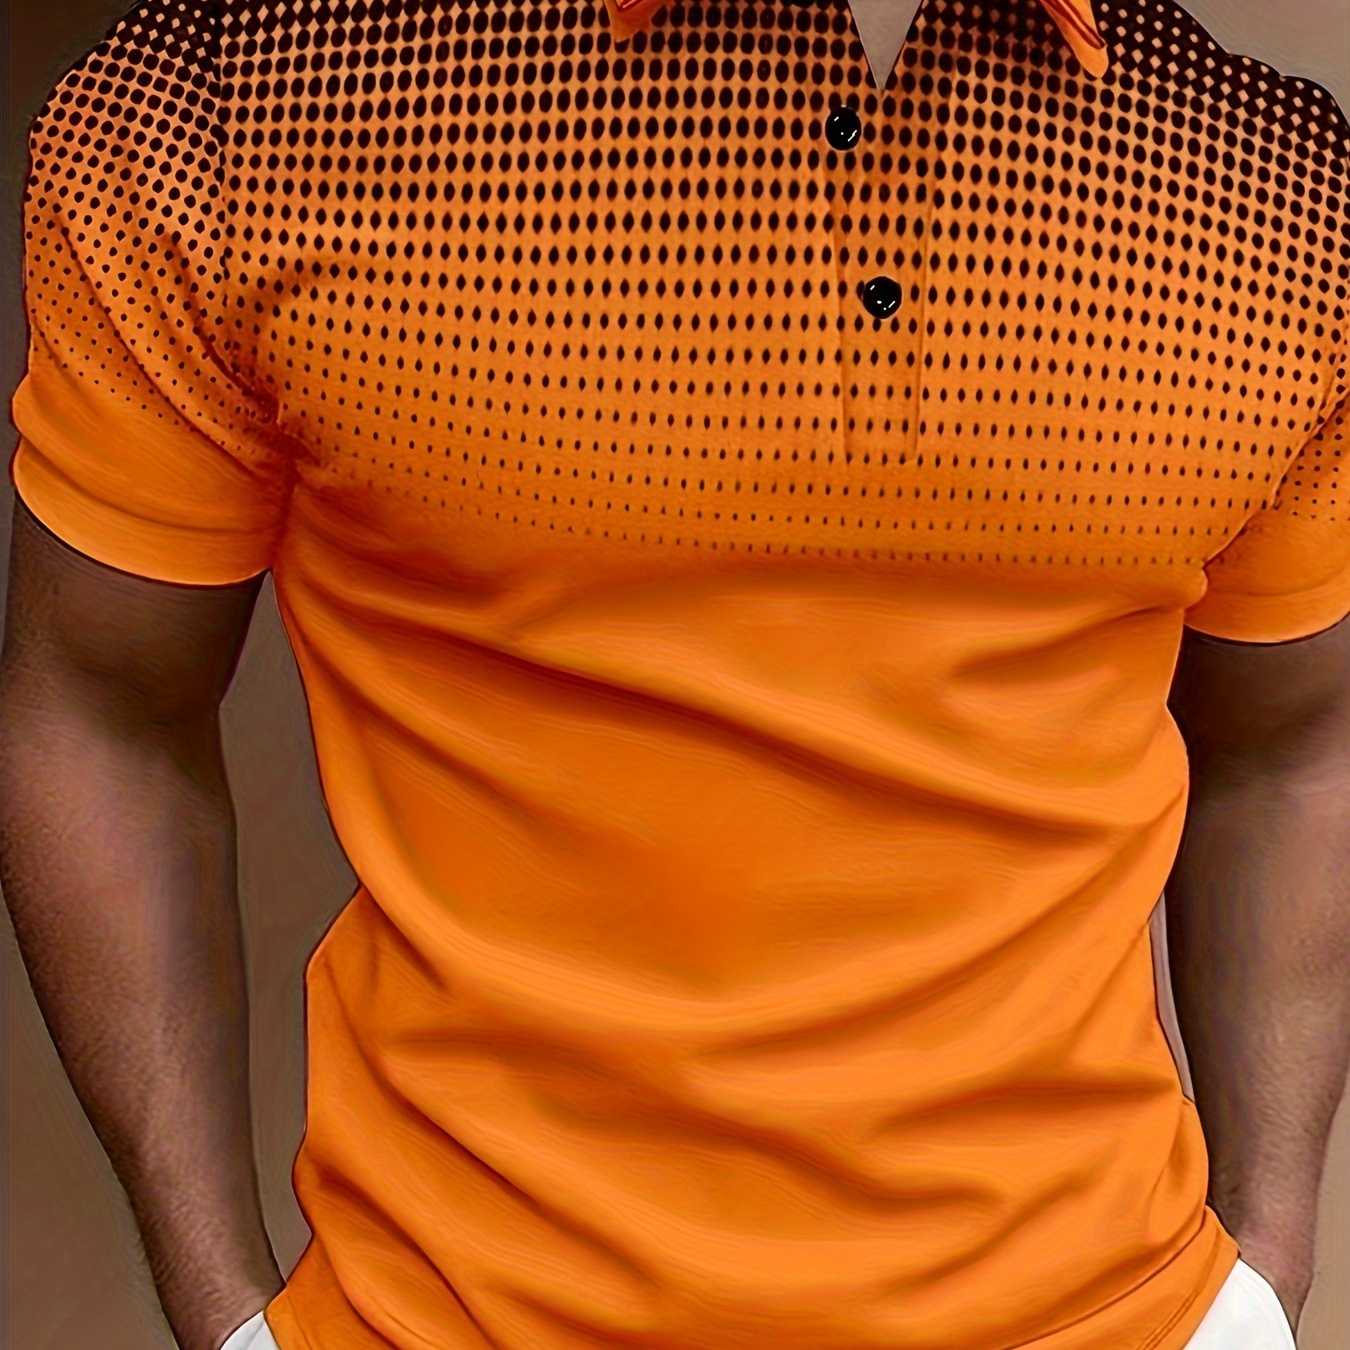 

Men's Summer Casual Short Sleeve Shirt With Buttons And Collar, Orange Mesh Print, Sports Style Top For Golf/tennis/office